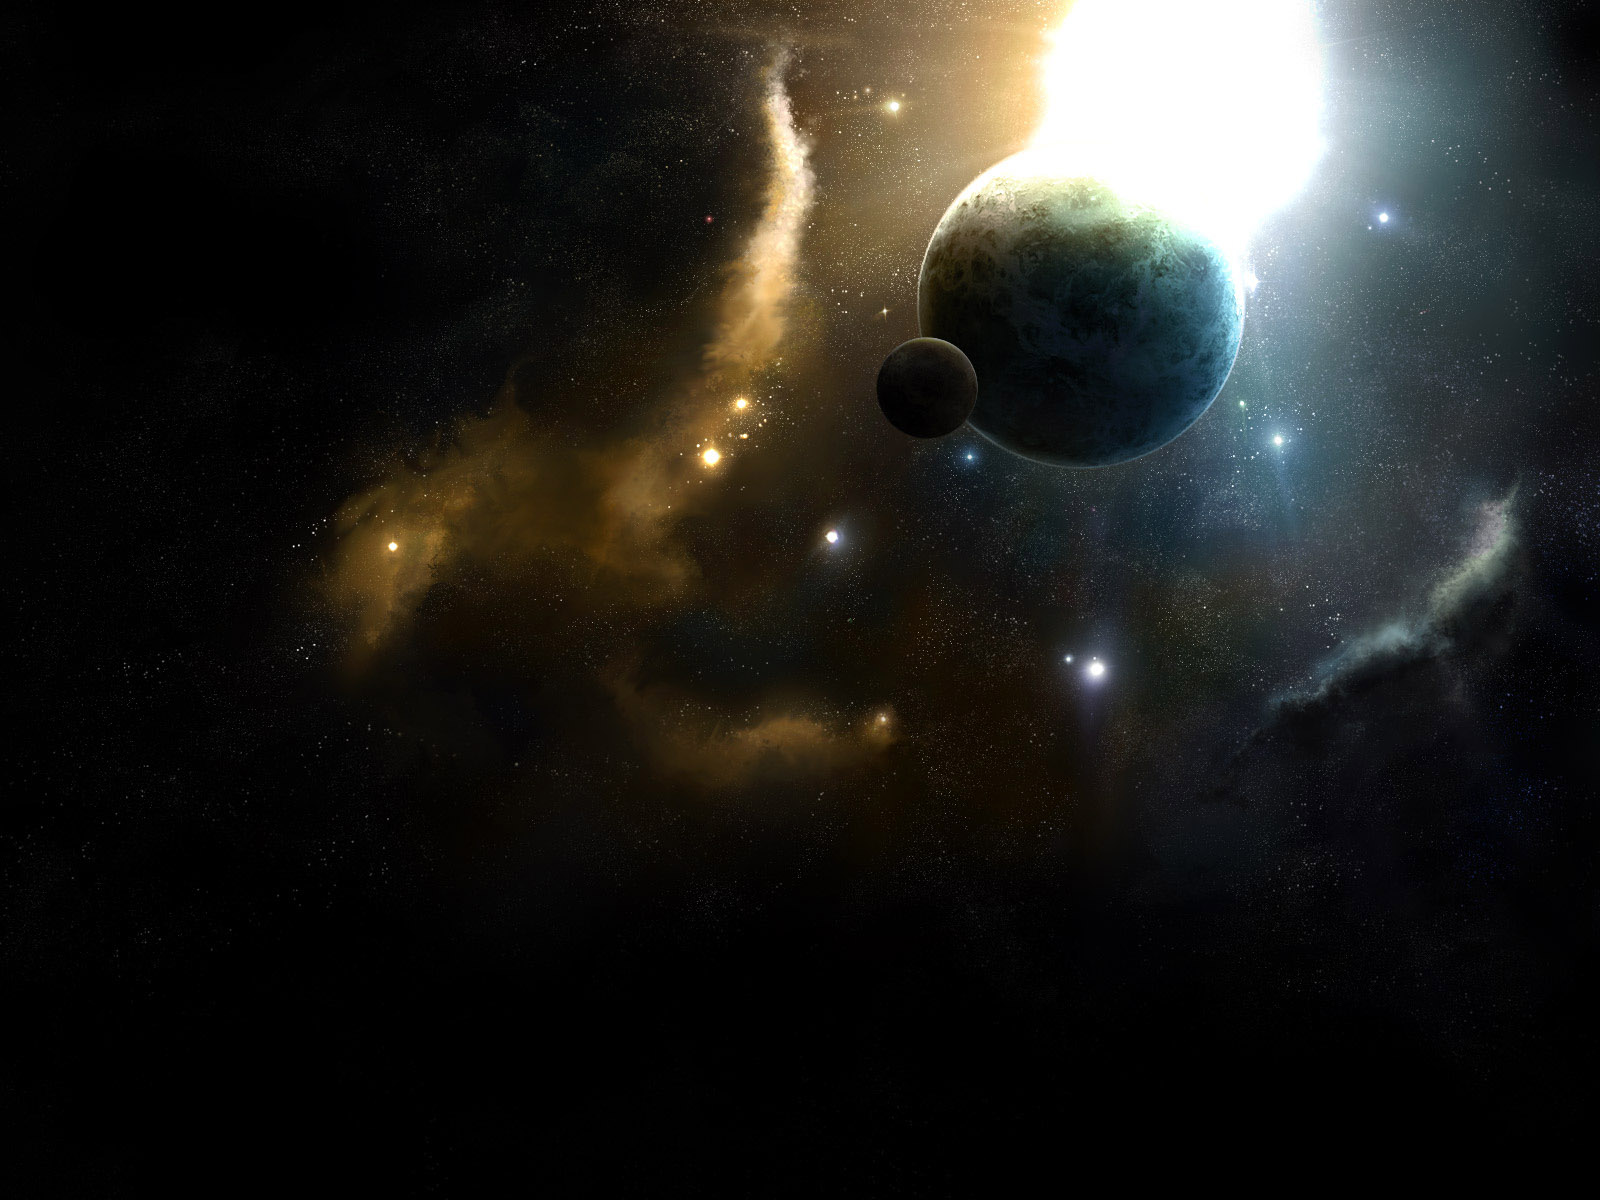 Universe Artistic Wallpapers HD 1600x Photo 19 of 54